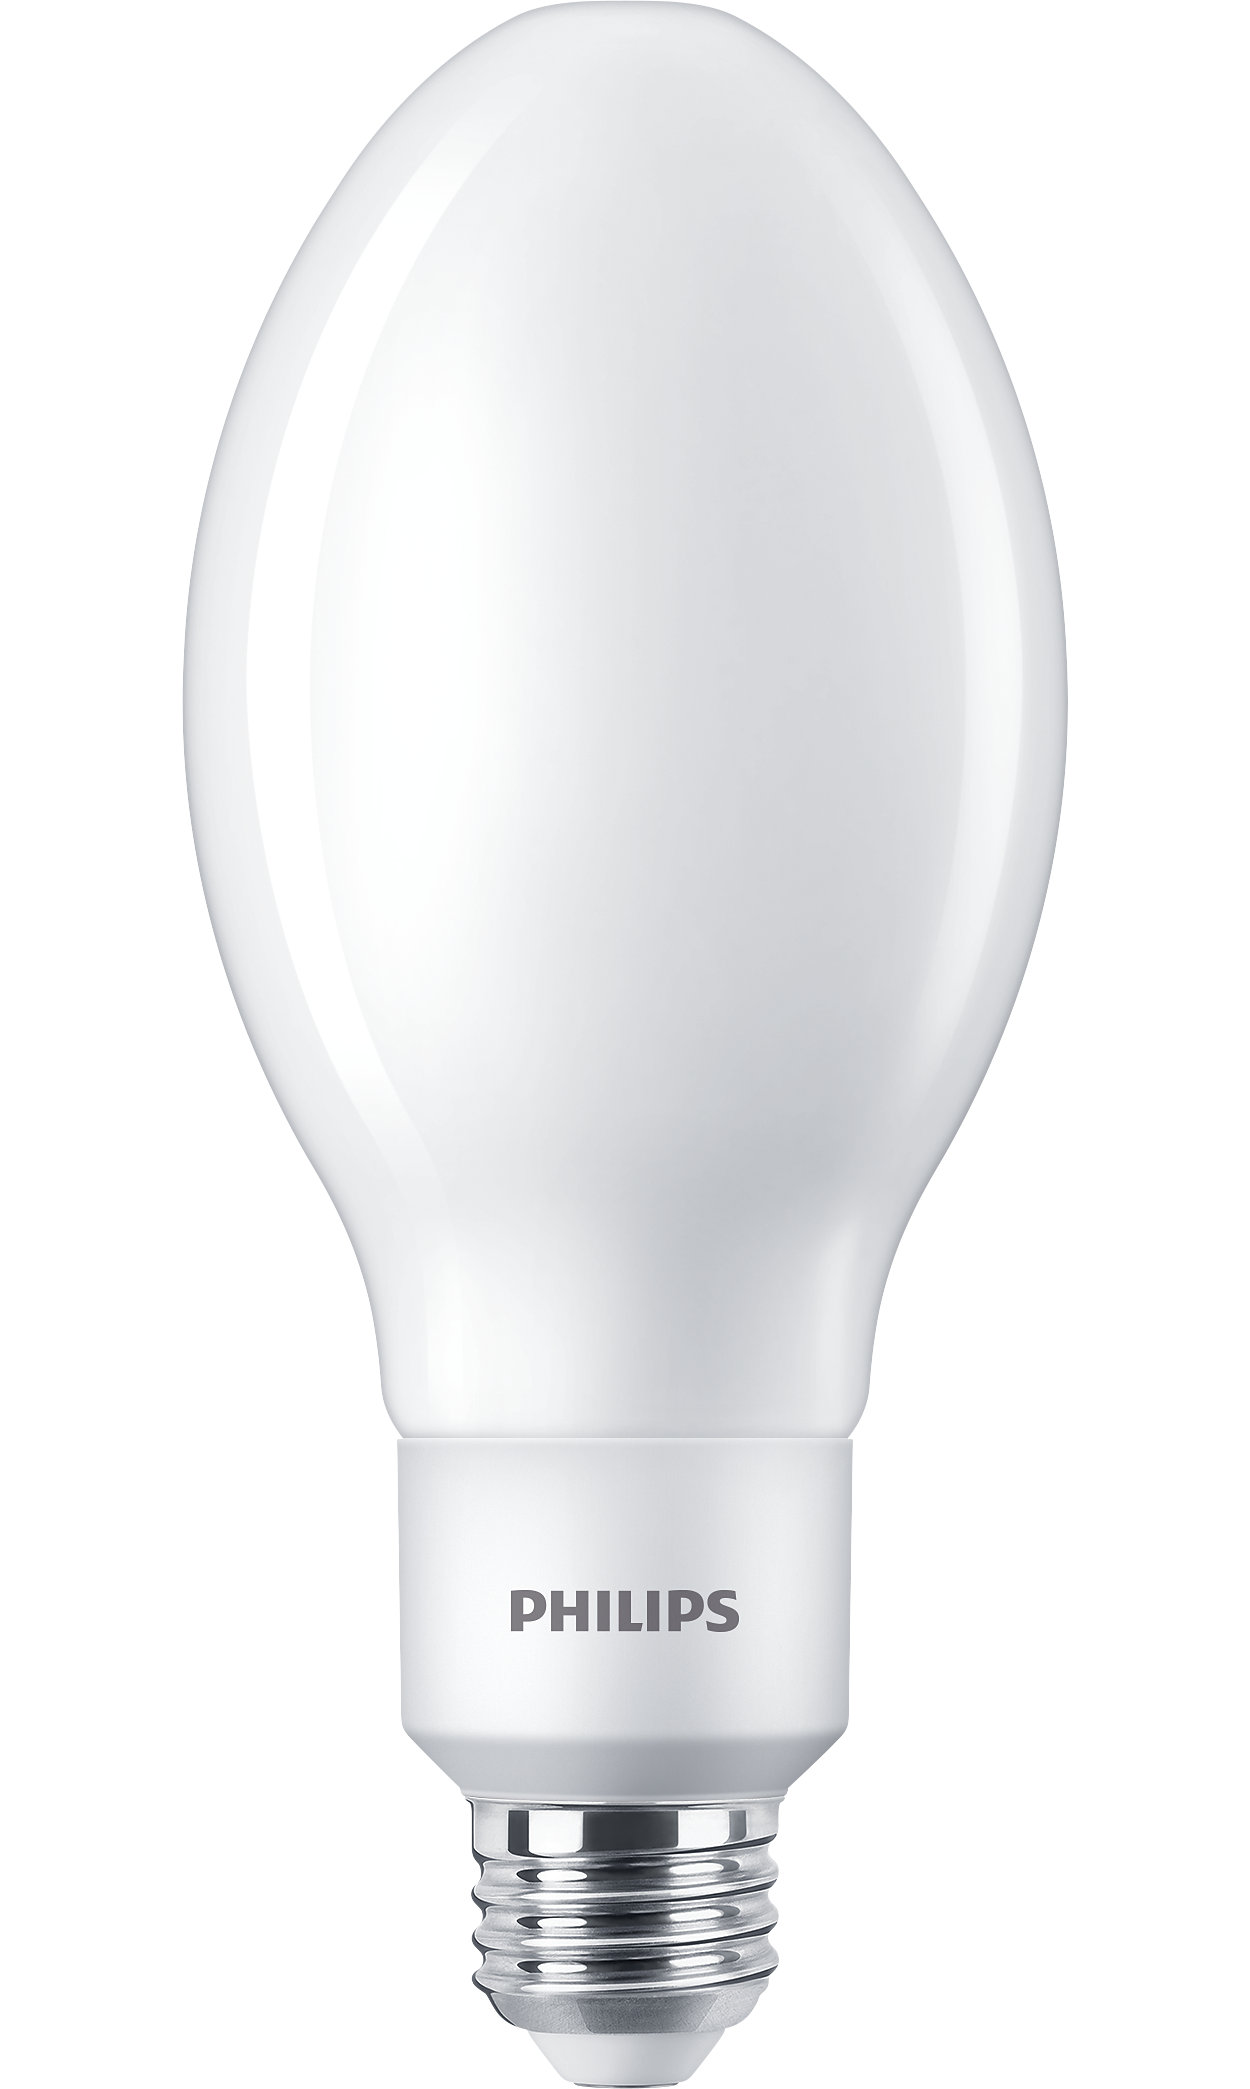 Philips Glass HID lamps offer a simple & short-payback LED solution to HID replacements and can be used in both indoor and outdoor applications.